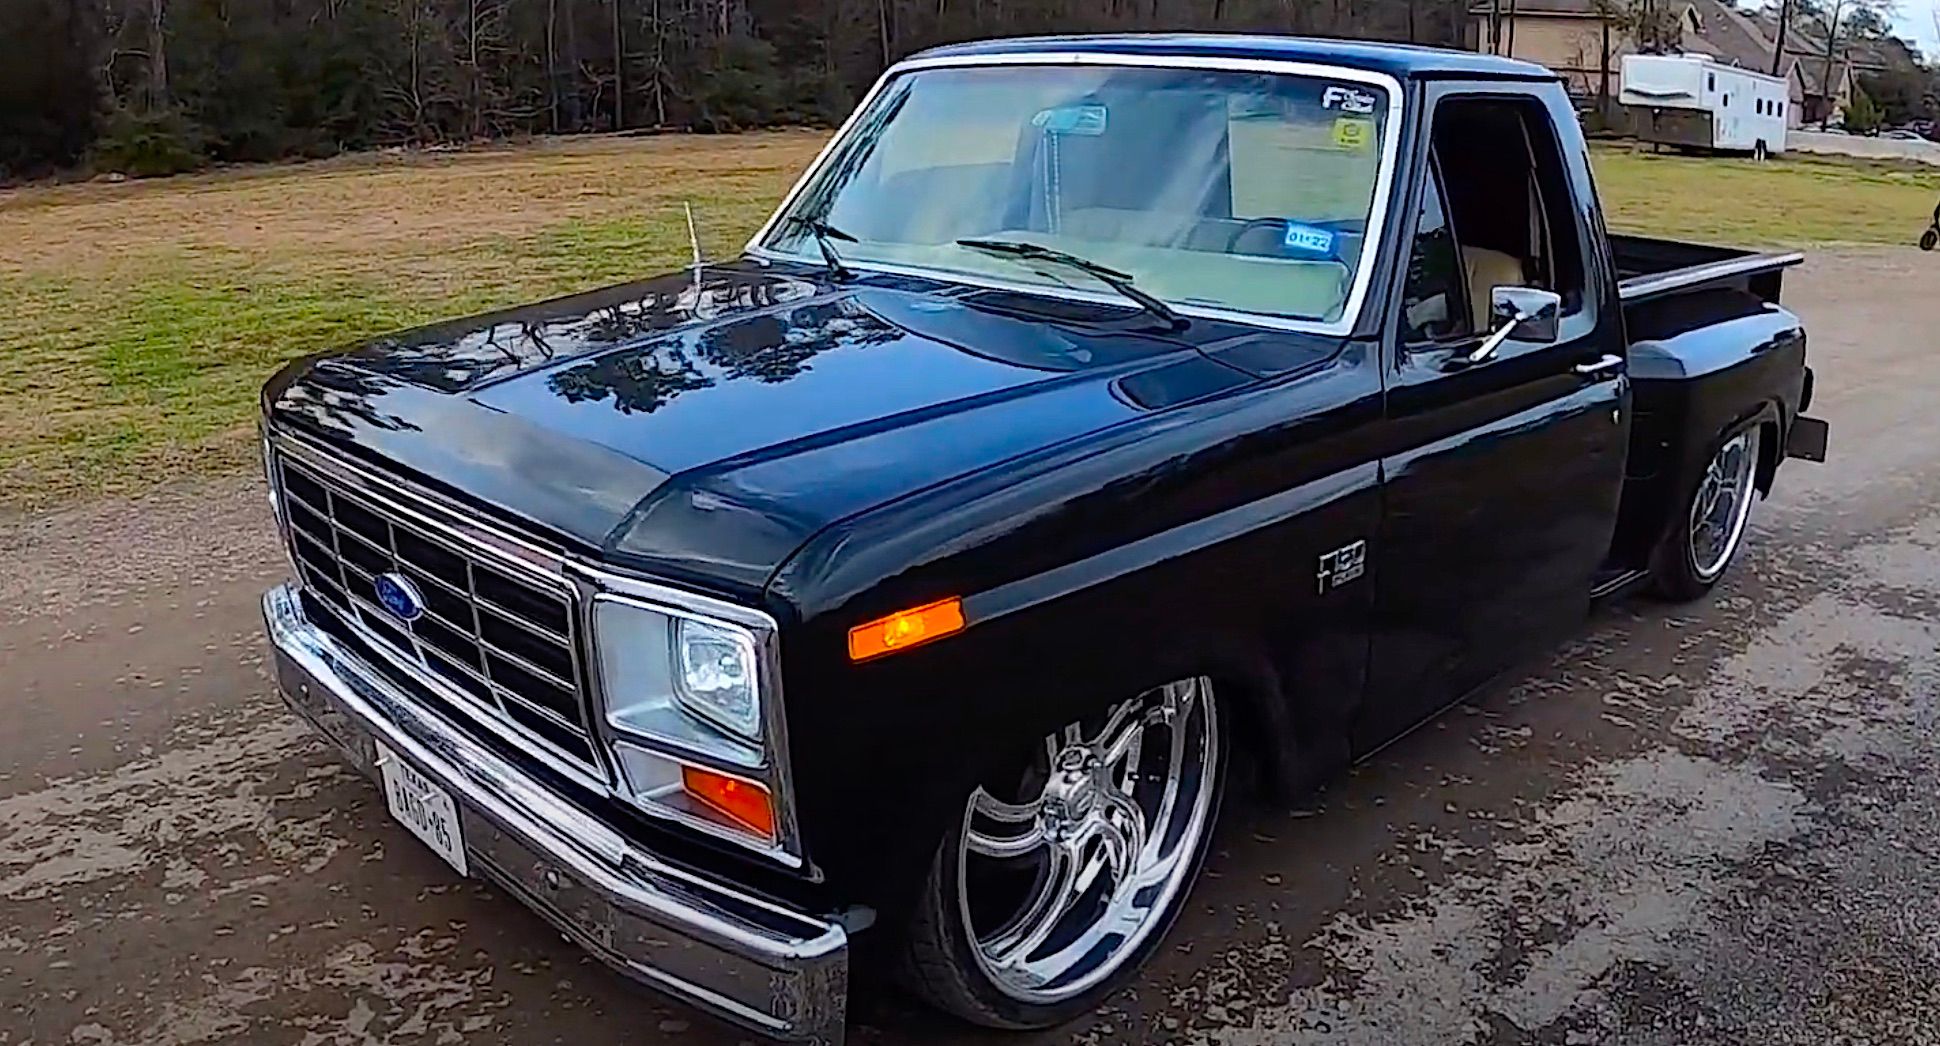 Coyote Swapped 1985 F-150 Is The Ultimate Muscle Truck